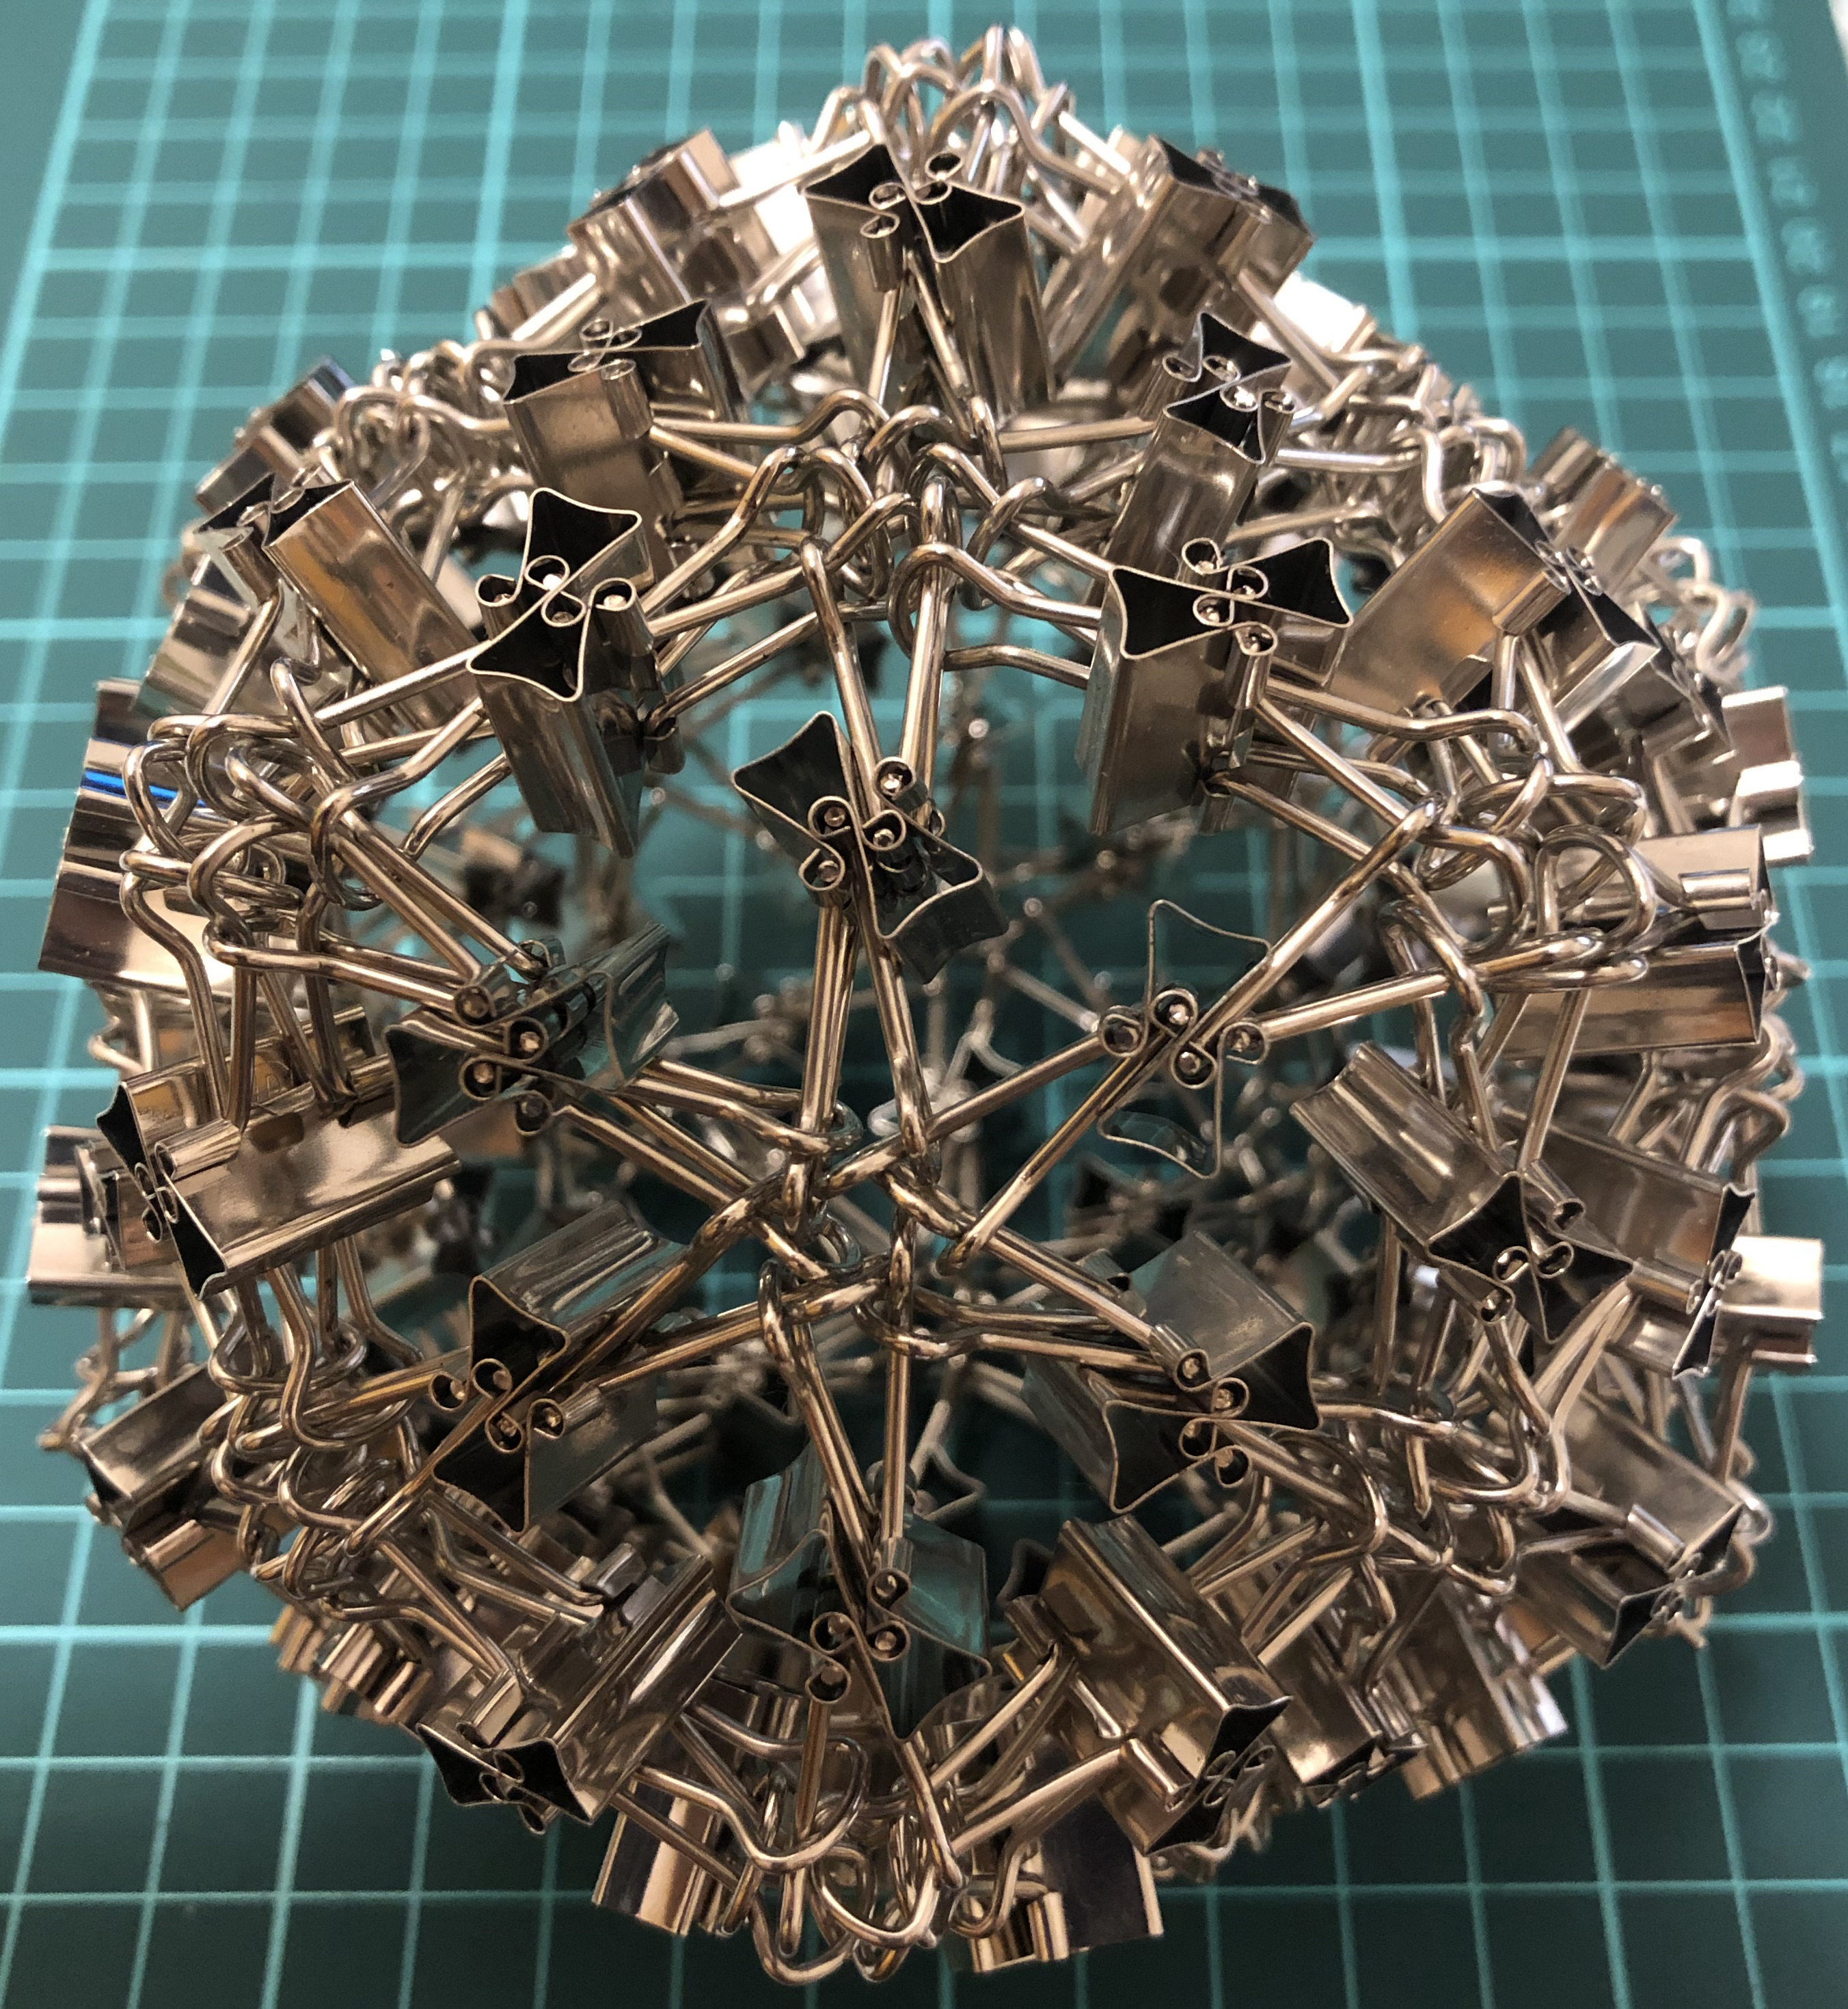 180 clips forming 90 I-edges forming pentakis dodecahedron